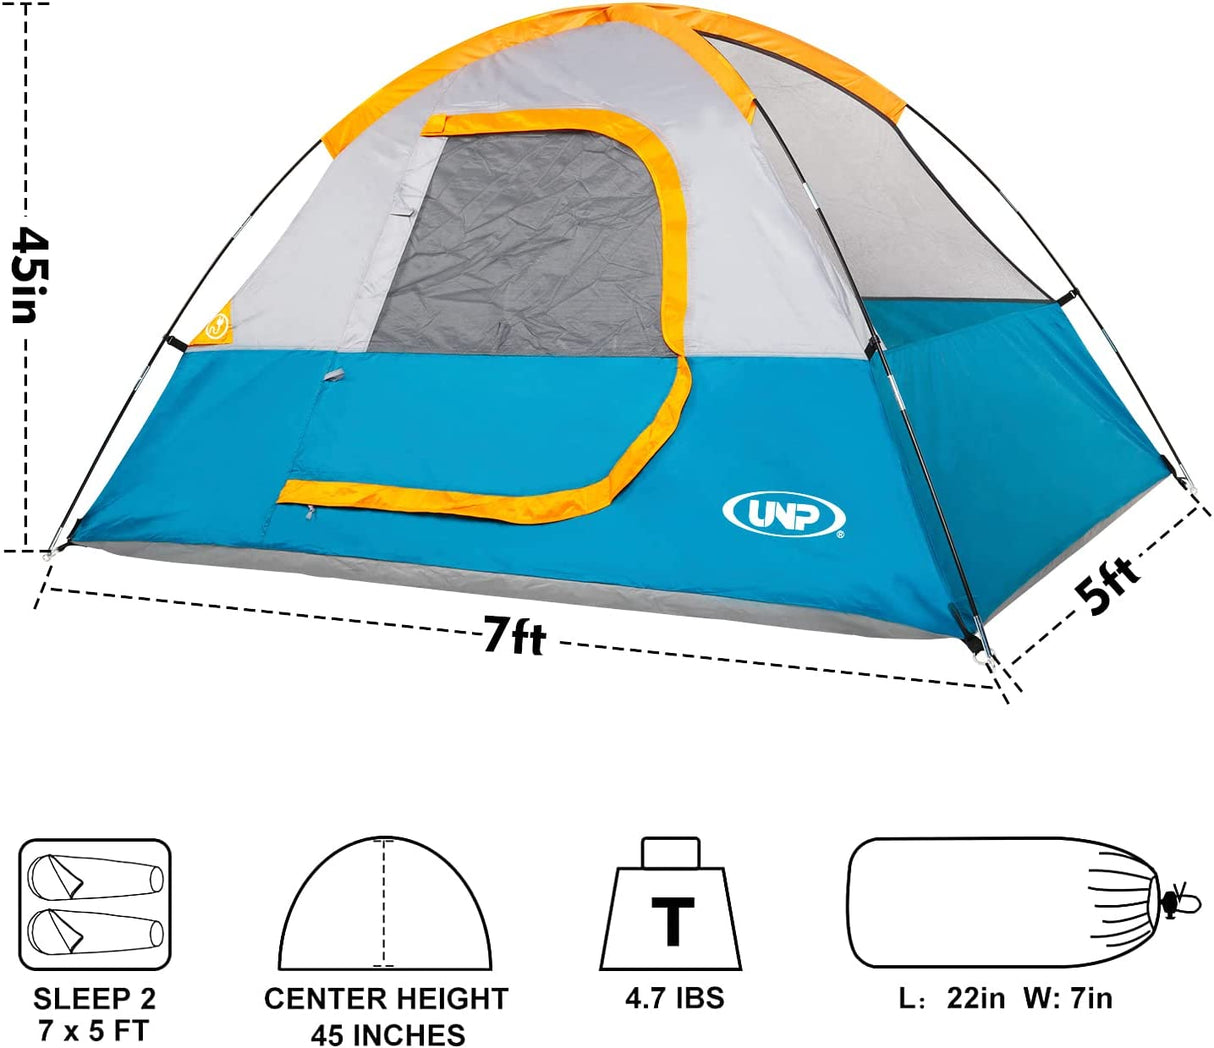 Camping Tent 2 Person, Waterproof Windproof Tent with Rainfly Easy Set Up-Portable Dome Tents for Camping